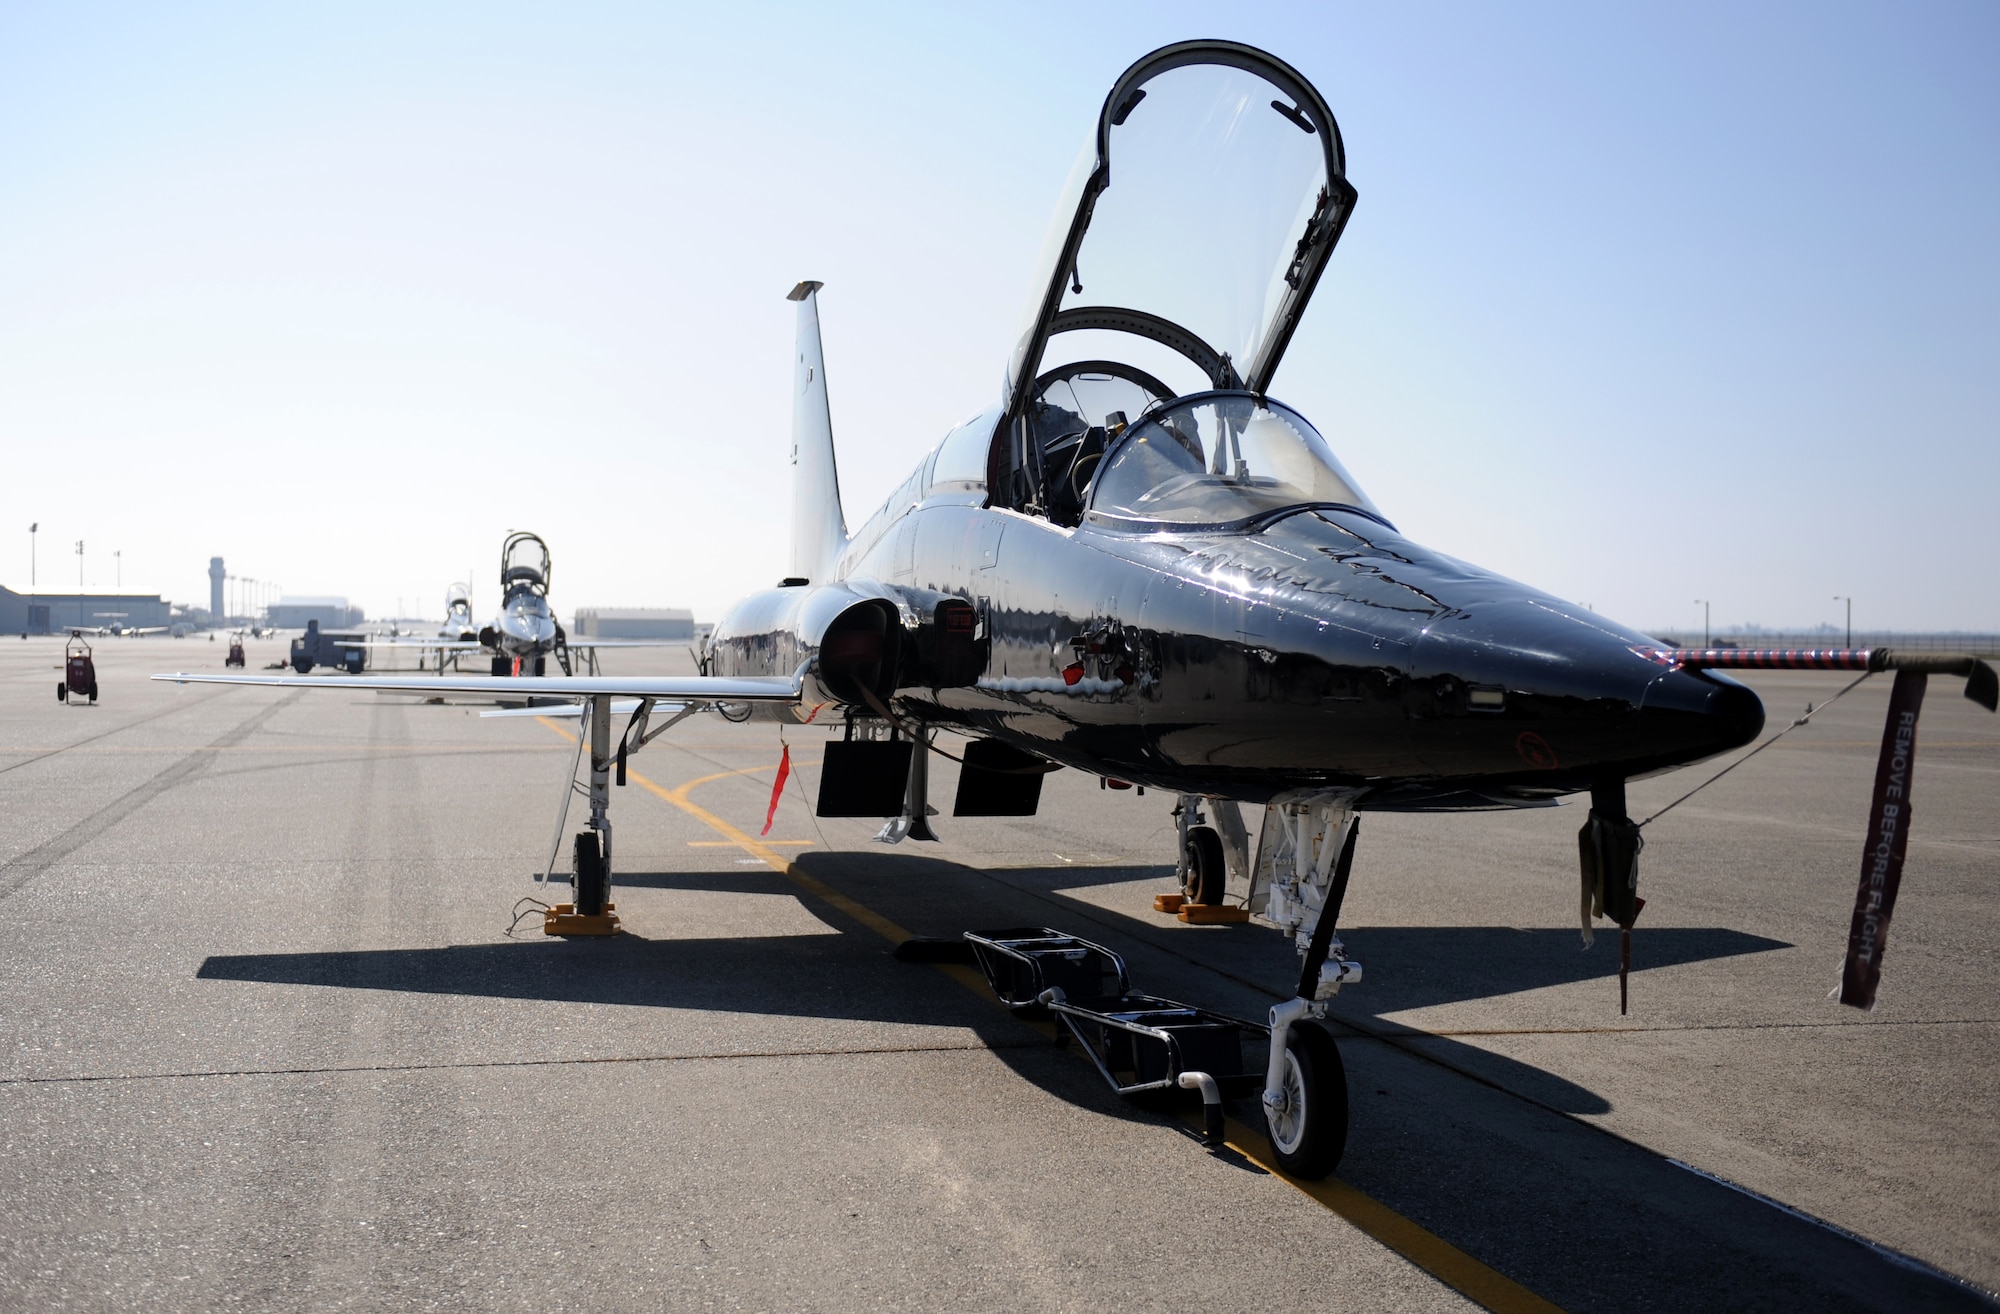 A T-38 Talon jet trainer sits on the flight-line during a pilot rescue exercise on the flight-line at Beale Air Force Base, Calif., Feb. 13, 2013. Beale’s Talons are painted black to mirror the U-2 Dragon Lady. (U.S. Air Force photo by Staff Sgt. Robert M. Trujillo/Released)